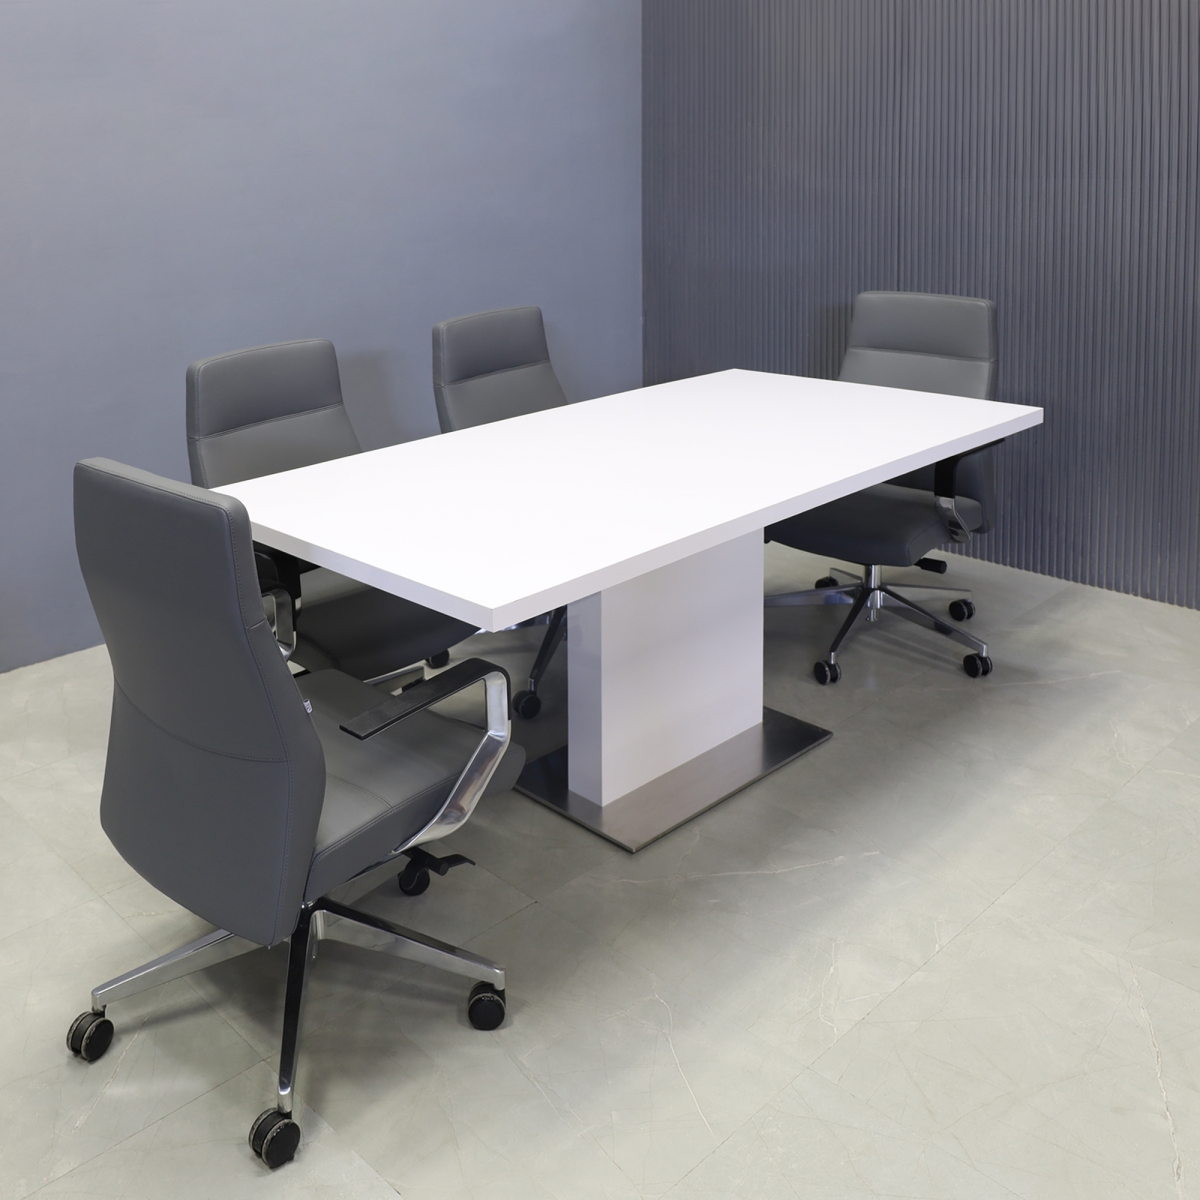 Newton Rectangular Conference Table in White Gloss Laminate - 72 In. - Stock #73